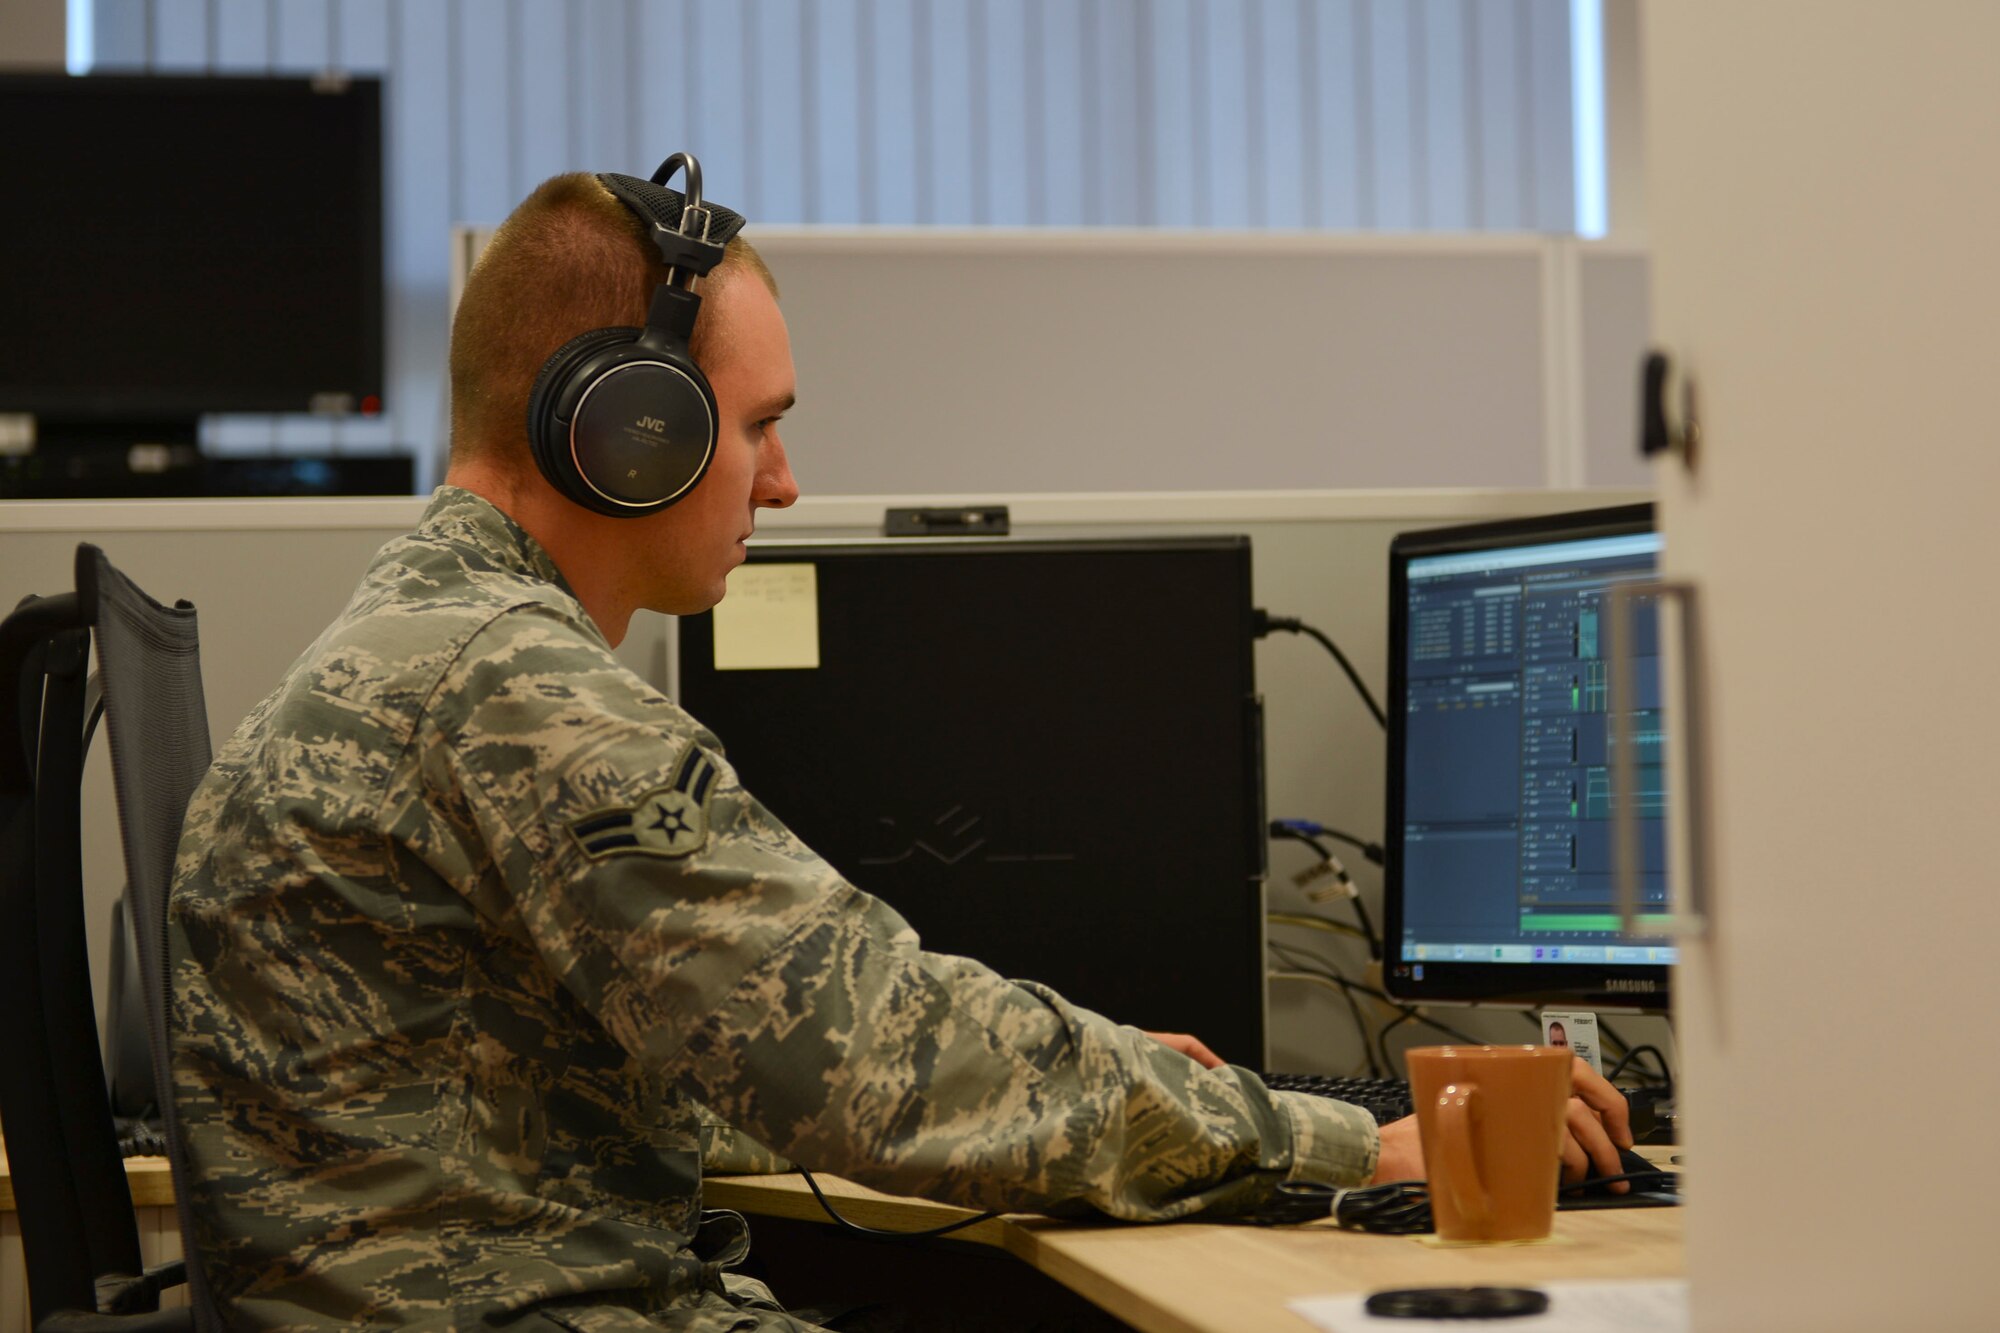 Senior Airman Ben Burgess, American Forces Network Kaiserslautern broadcast journalist, edits video footage on Vogelweh Military Complex, Sept. 10, 2014. The American Forces Network, Kaiserslautern, has been providing service to military members since 1954 while bringing with them a taste of home. (U.S. Air Force photo/Airman 1st Class Michael Stuart) (U.S. Air Force photo/Airman 1st Class Michael Stuart)